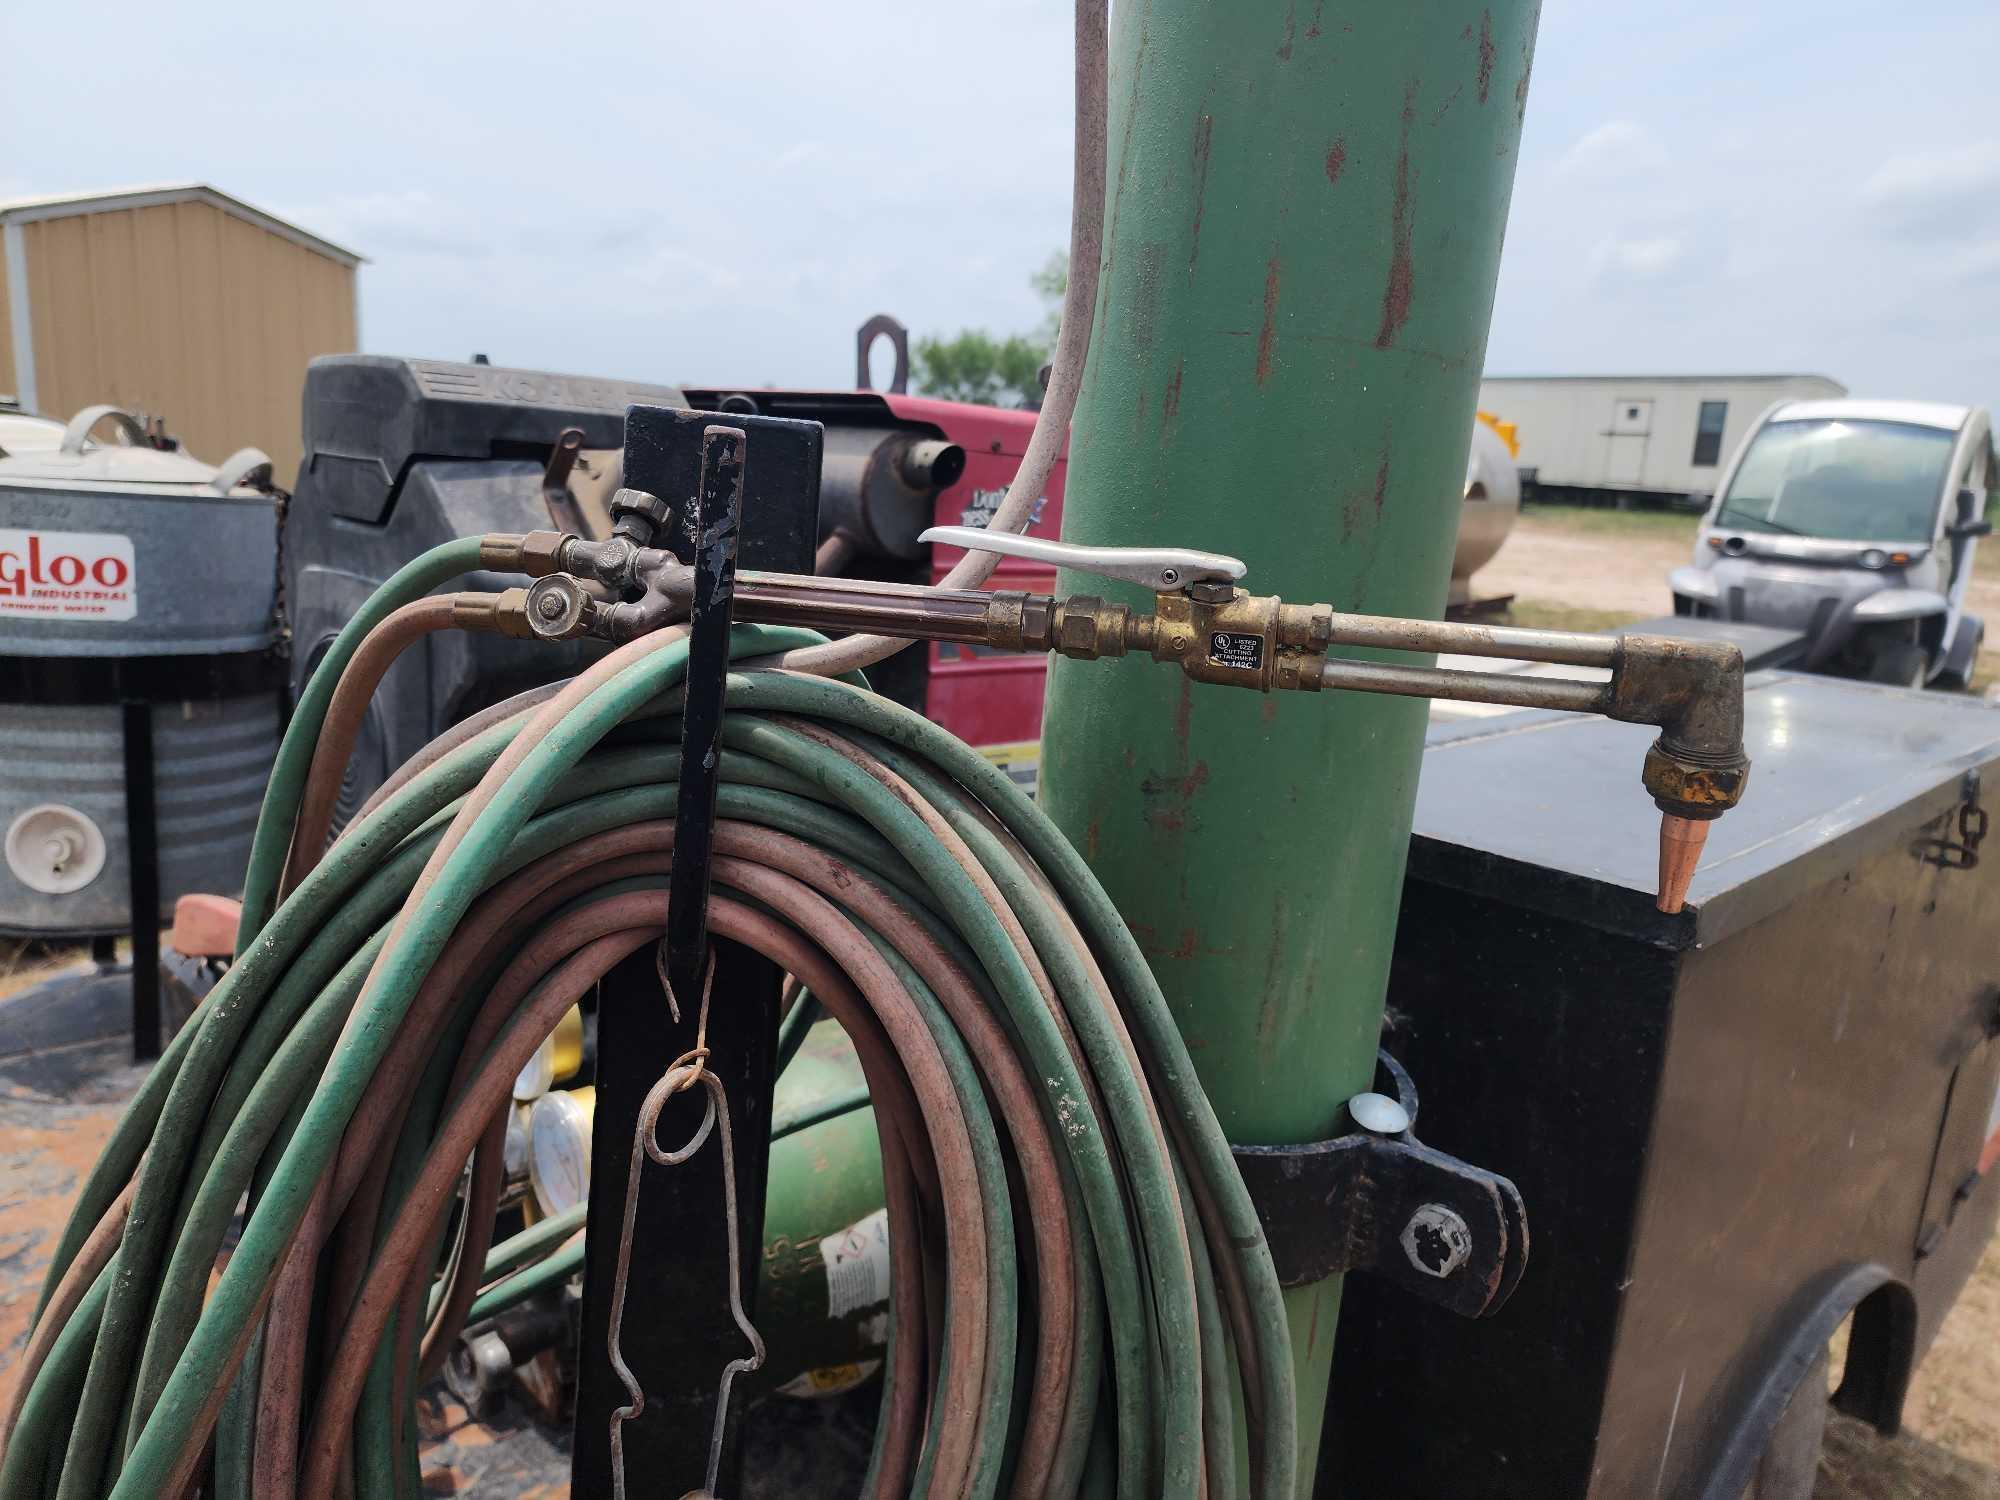 Lincoln Electric Ranger Welder on Tongue Pull Single-Axel Trailer